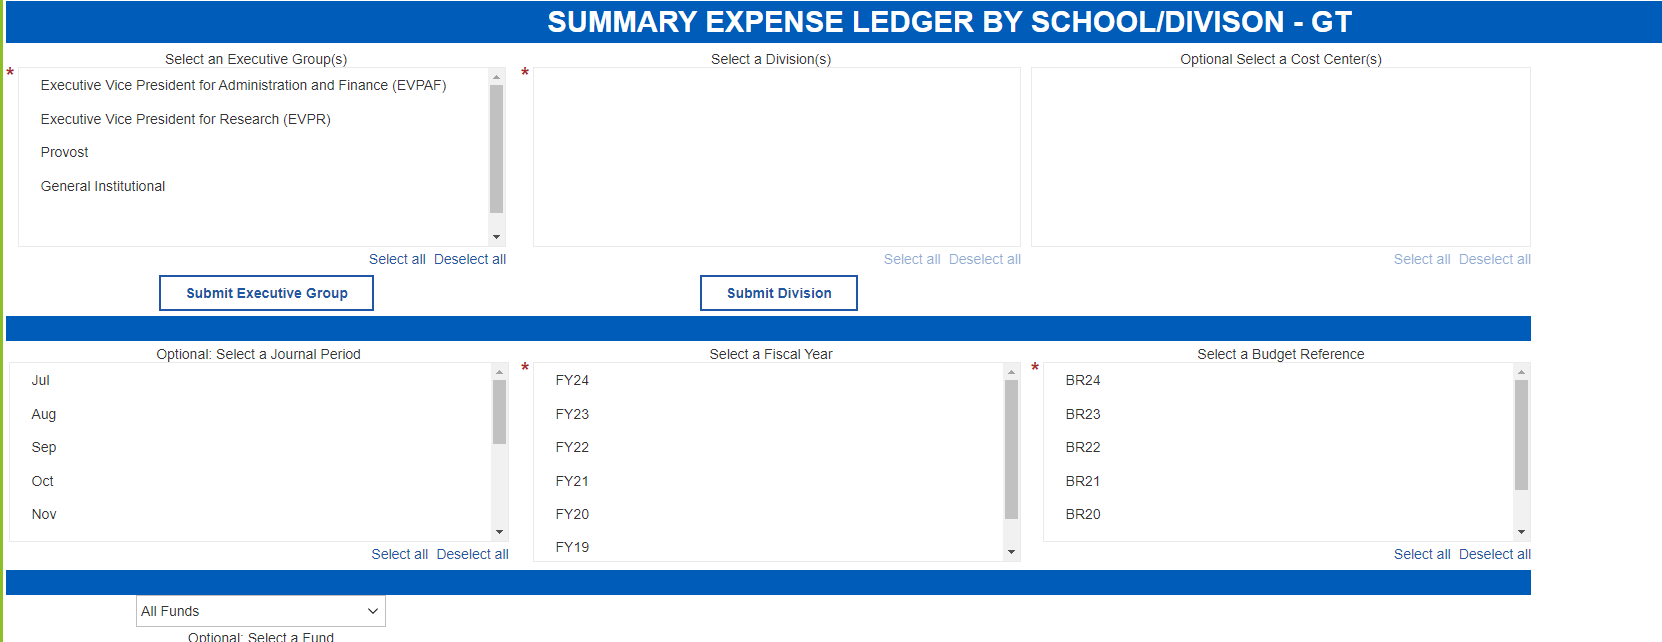 Summary Expense Ledger by School/Division - GT